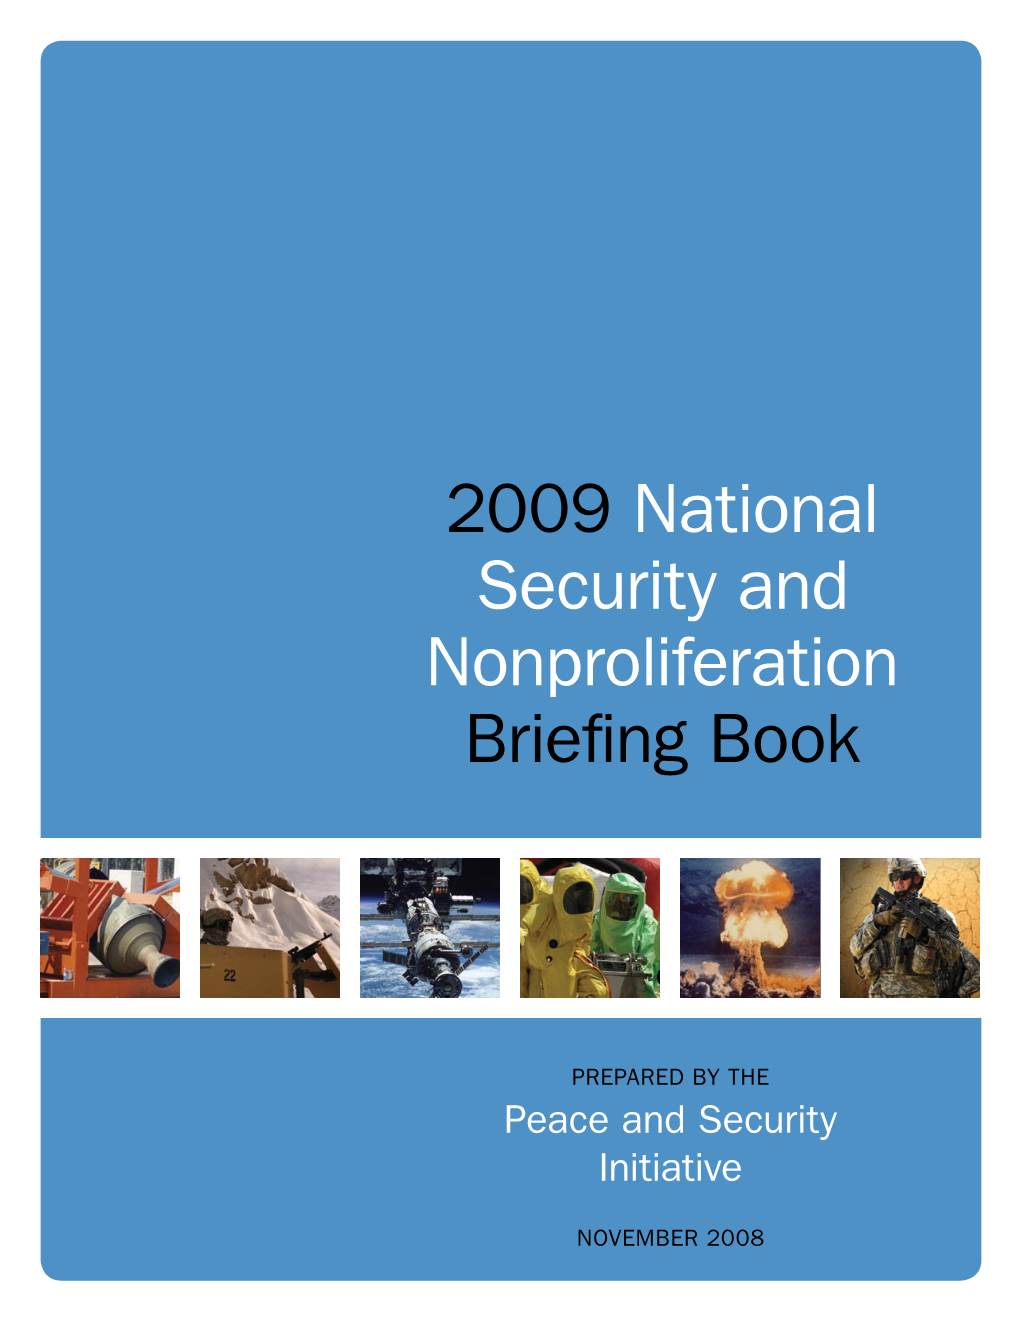 2009 National Security and Nonproliferation Briefing Book